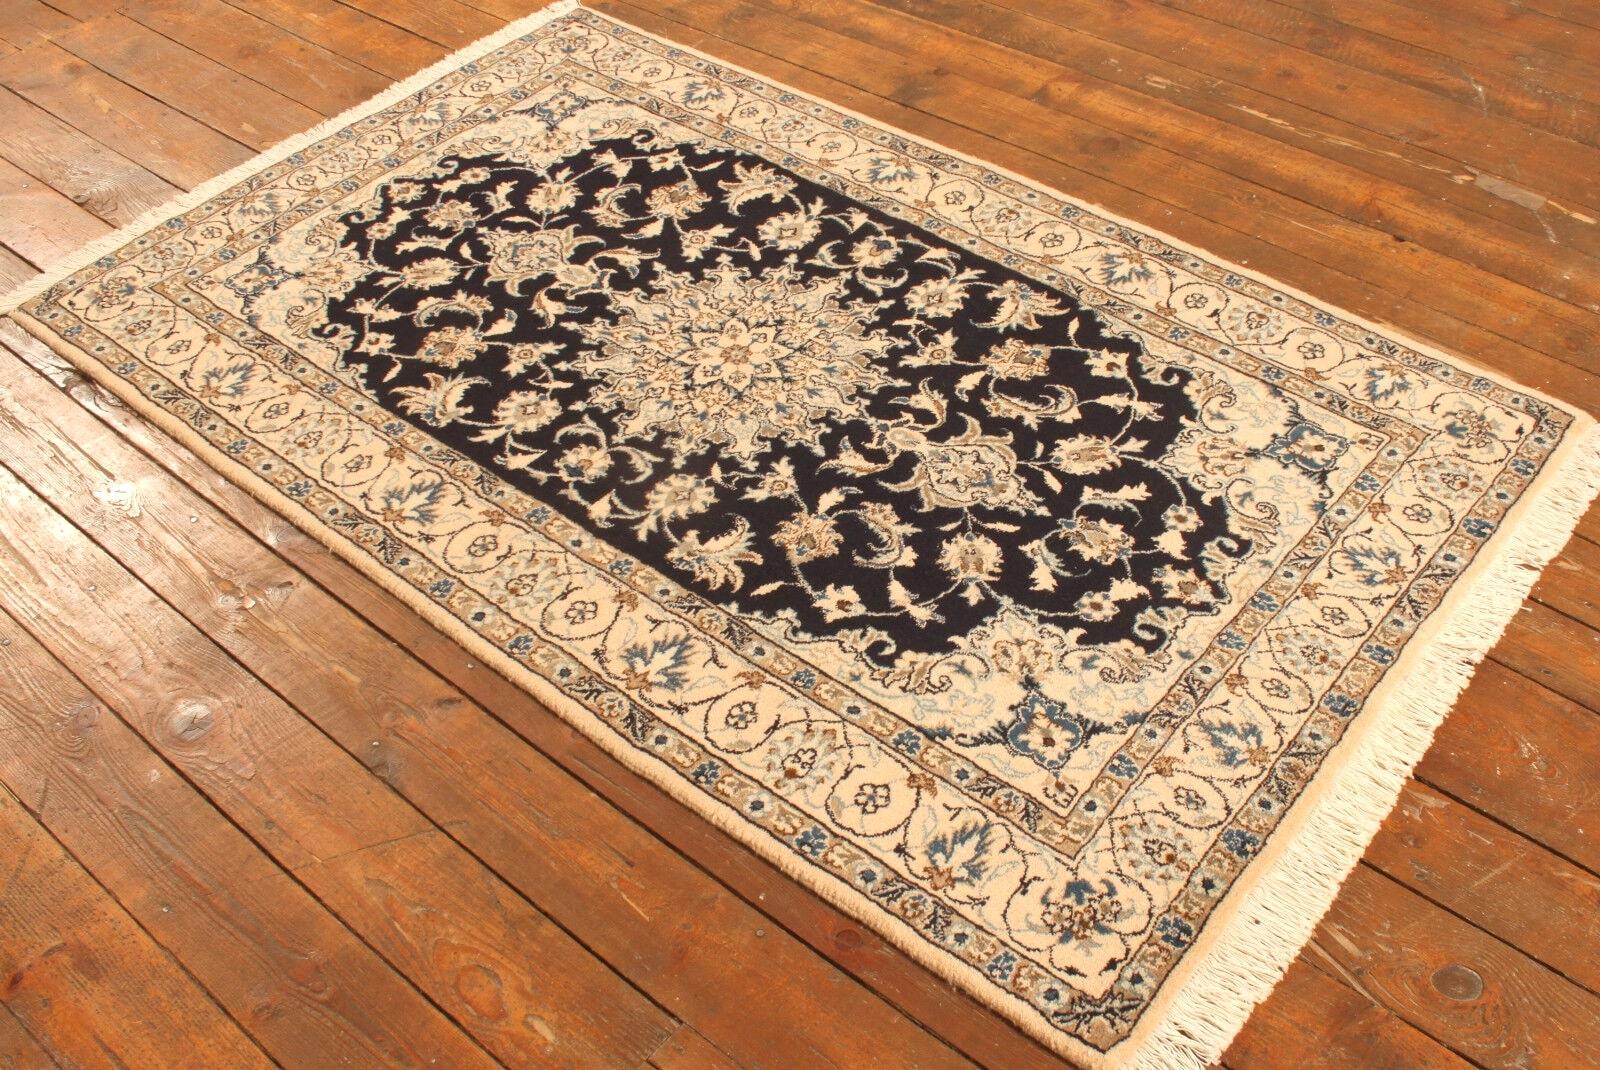 Handmade Vintage Persian Style Nain Rug 3.9' x 6.6', 1980s - 1T53 In Good Condition For Sale In Bordeaux, FR